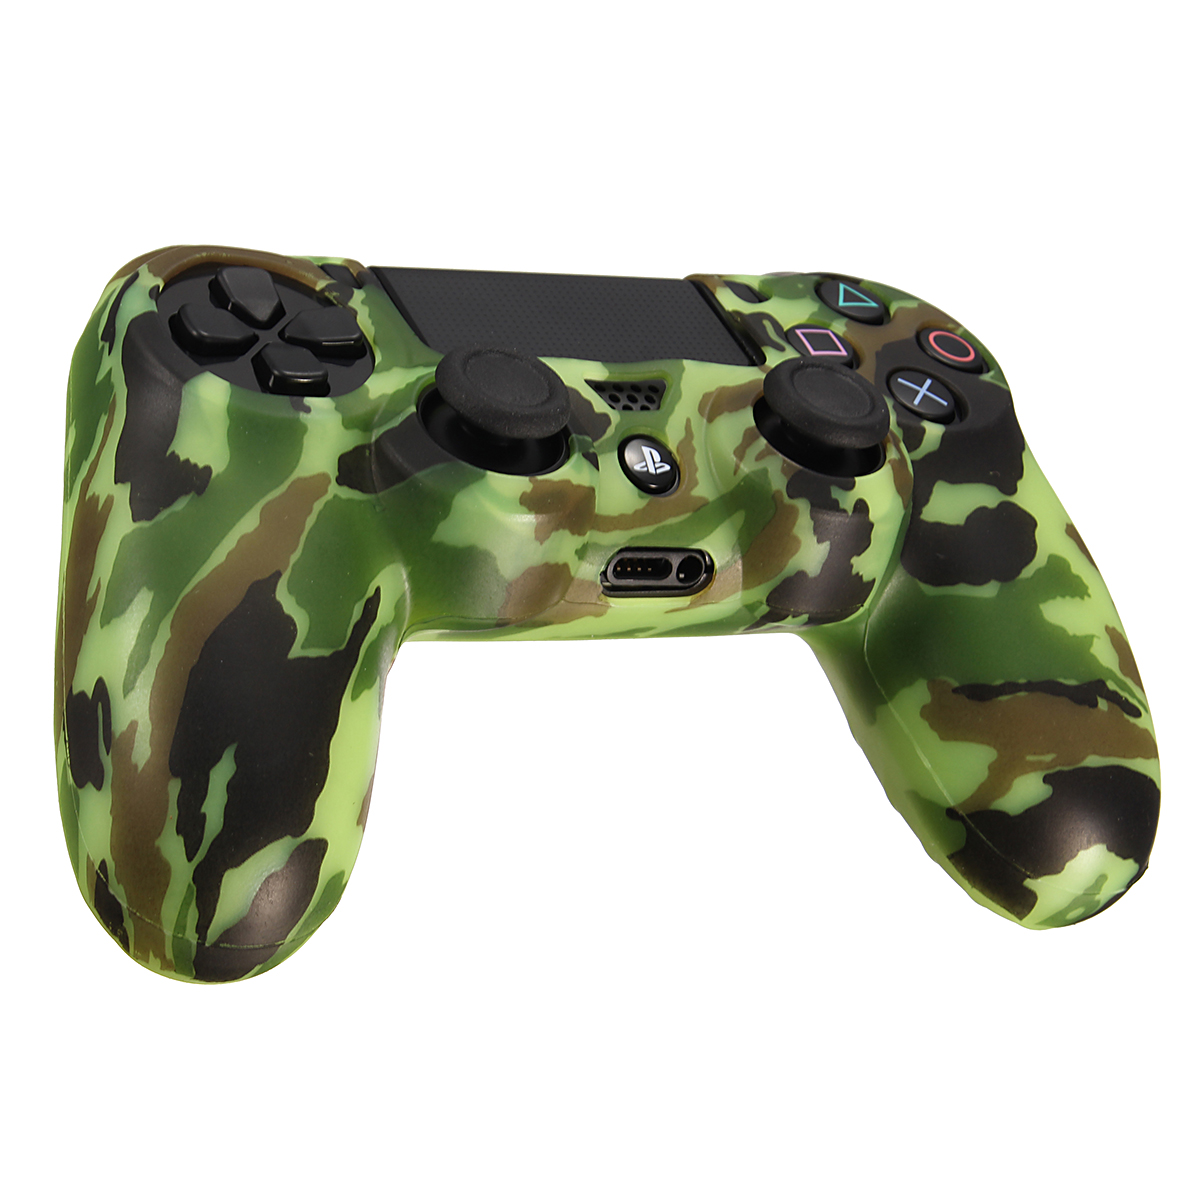 Durable Decal Camouflage Grip Cover Case Silicone Rubber Soft Skin Protector for Playstation 4 for Dualshock 4 Gamepad 3